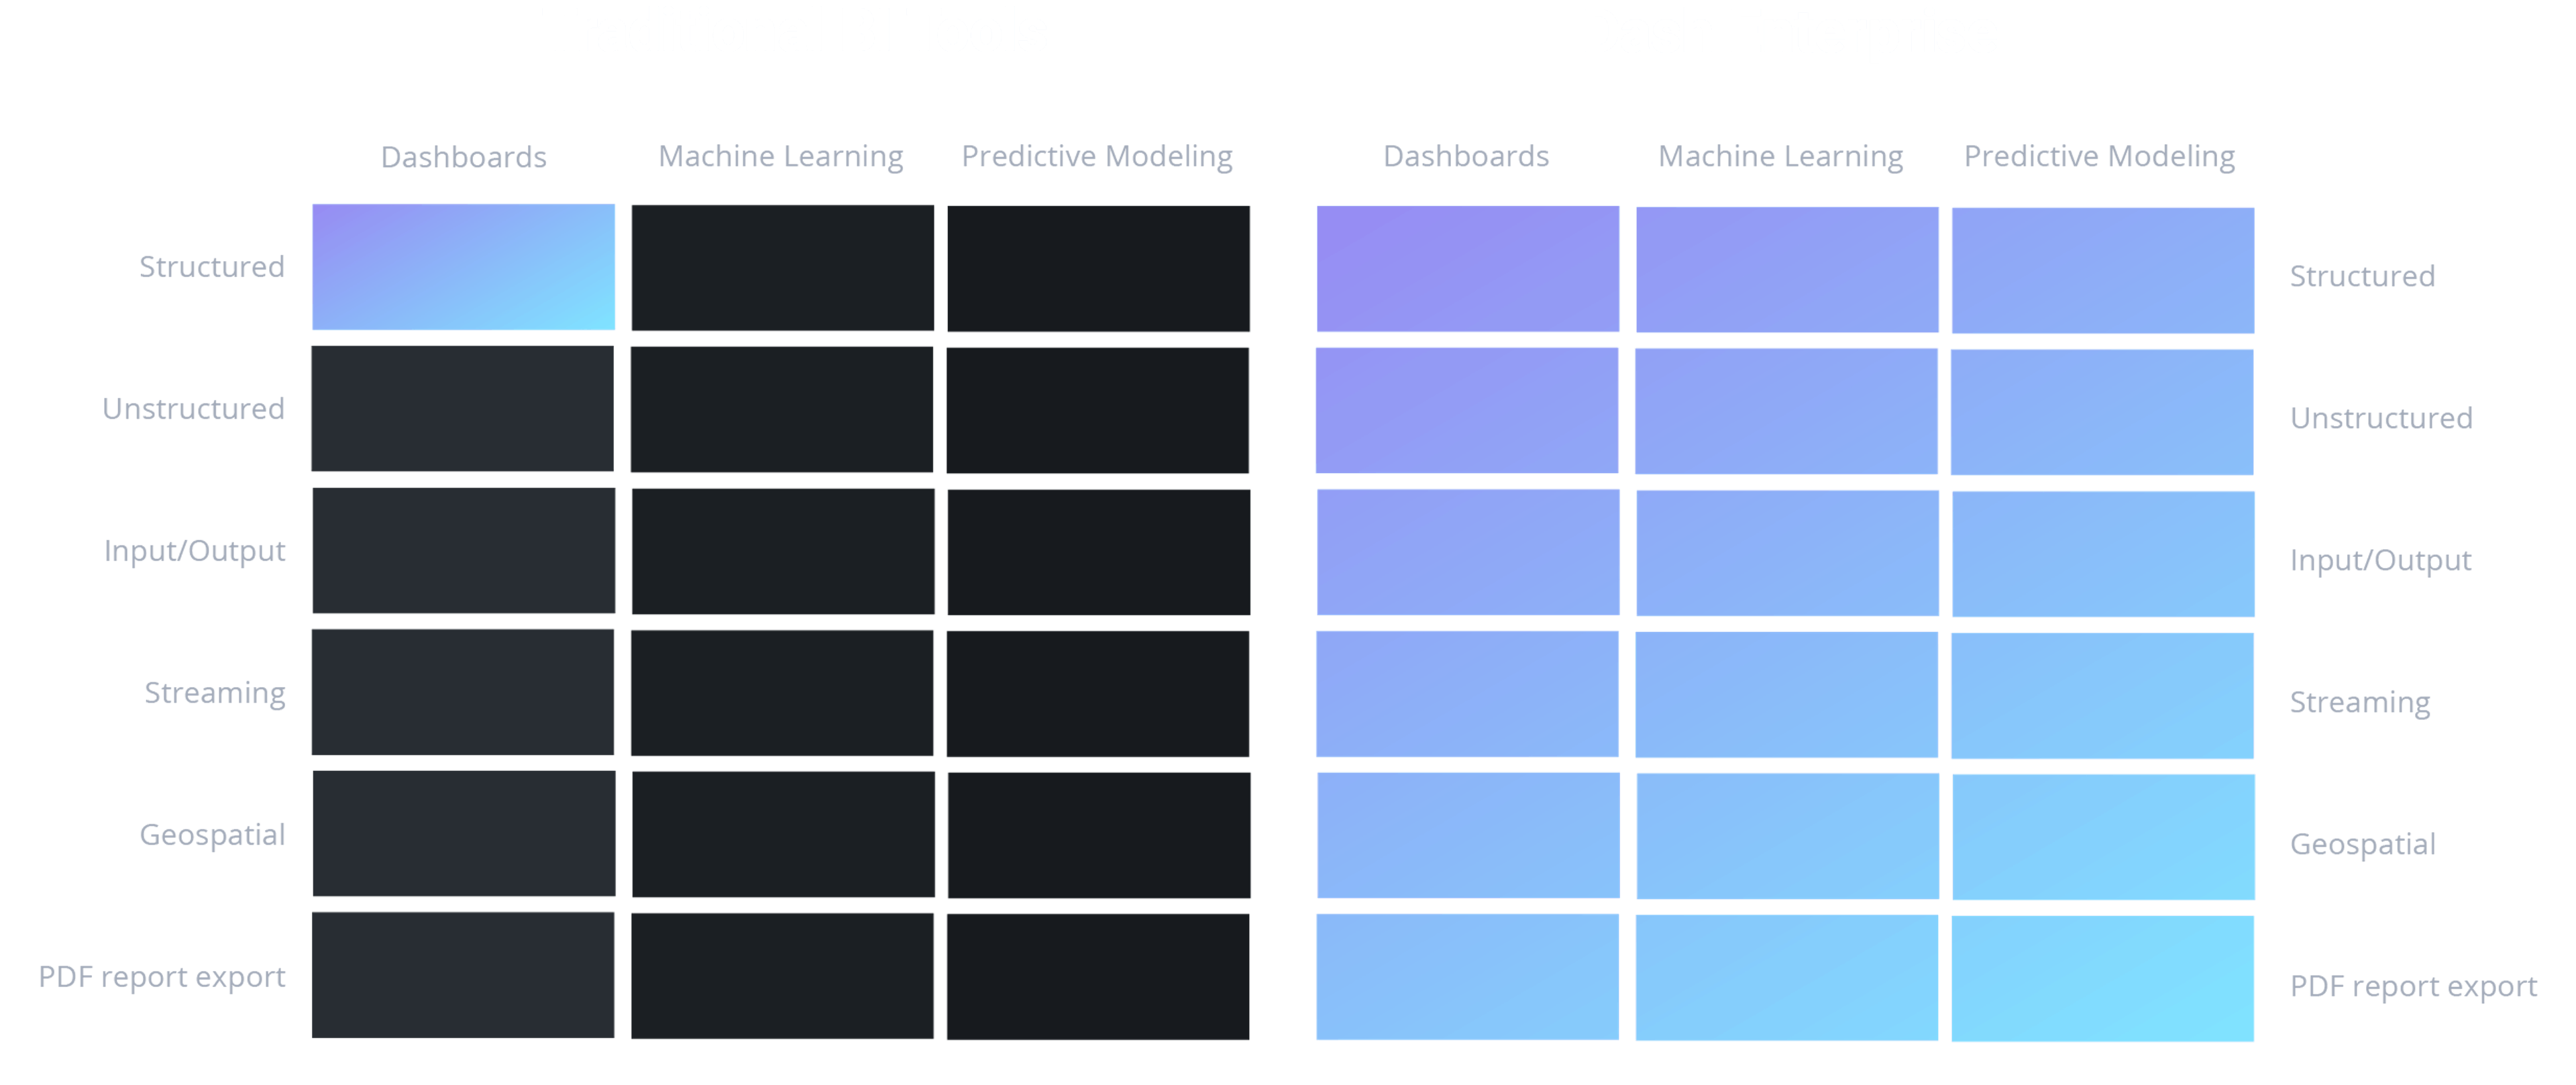 Dash helps data scientists & quants operationalize Python models